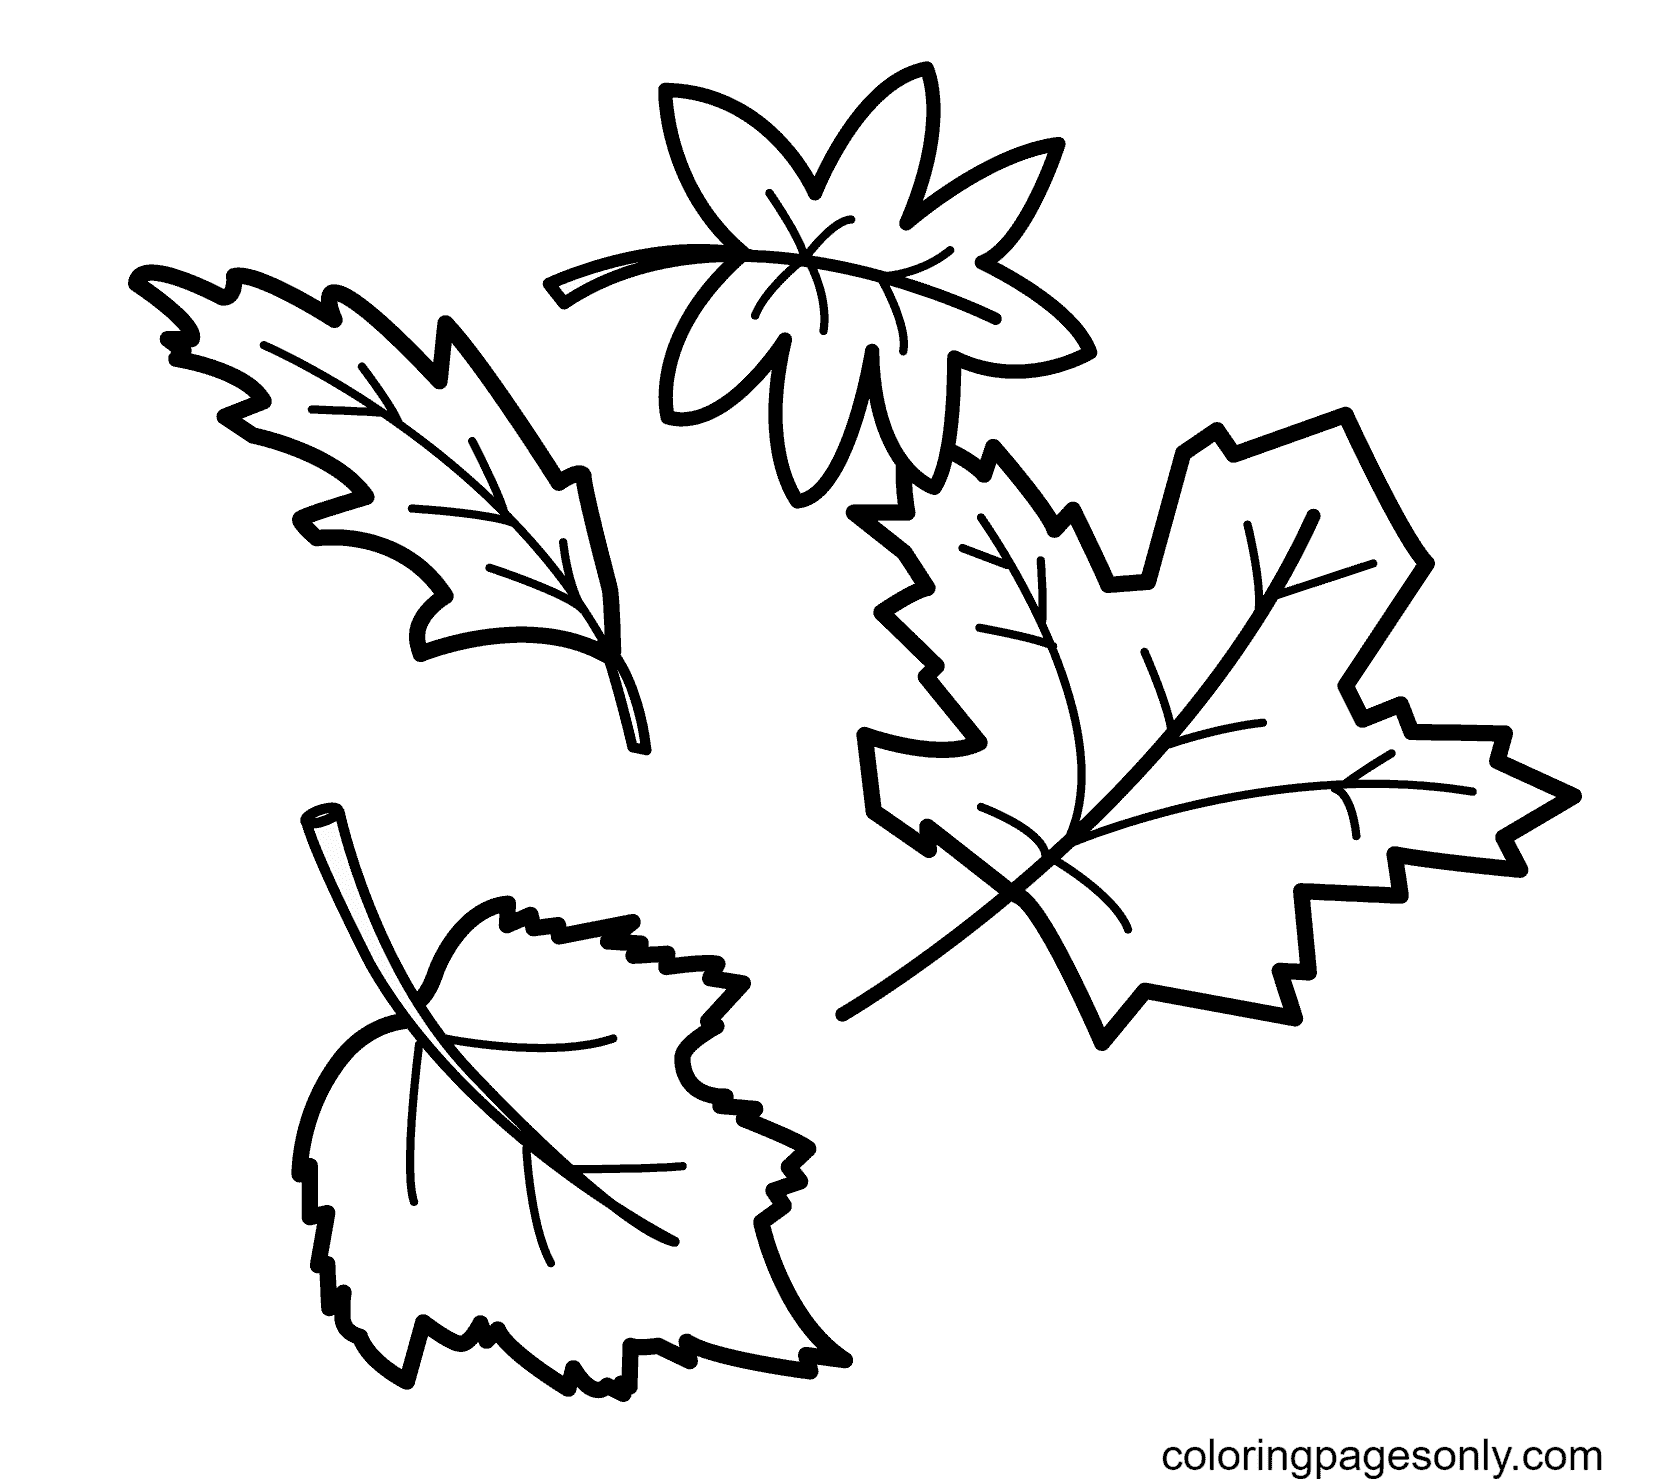 printable-autumn-leaves-coloring-pages-free-printable-coloring-pages